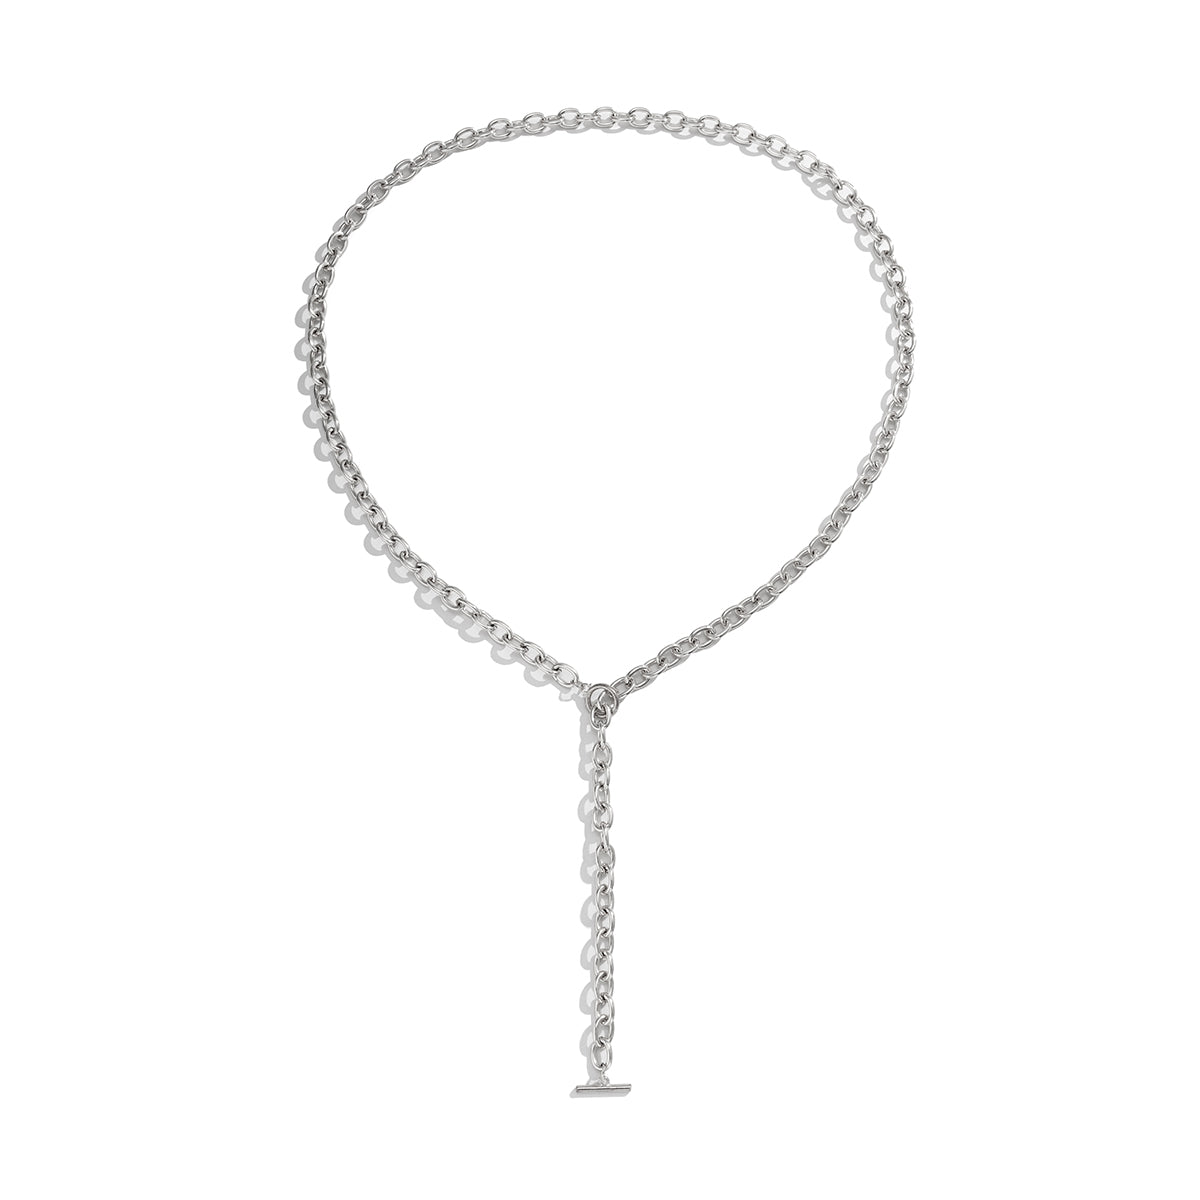 Silver-Plated Cable Toggle Waist Chain